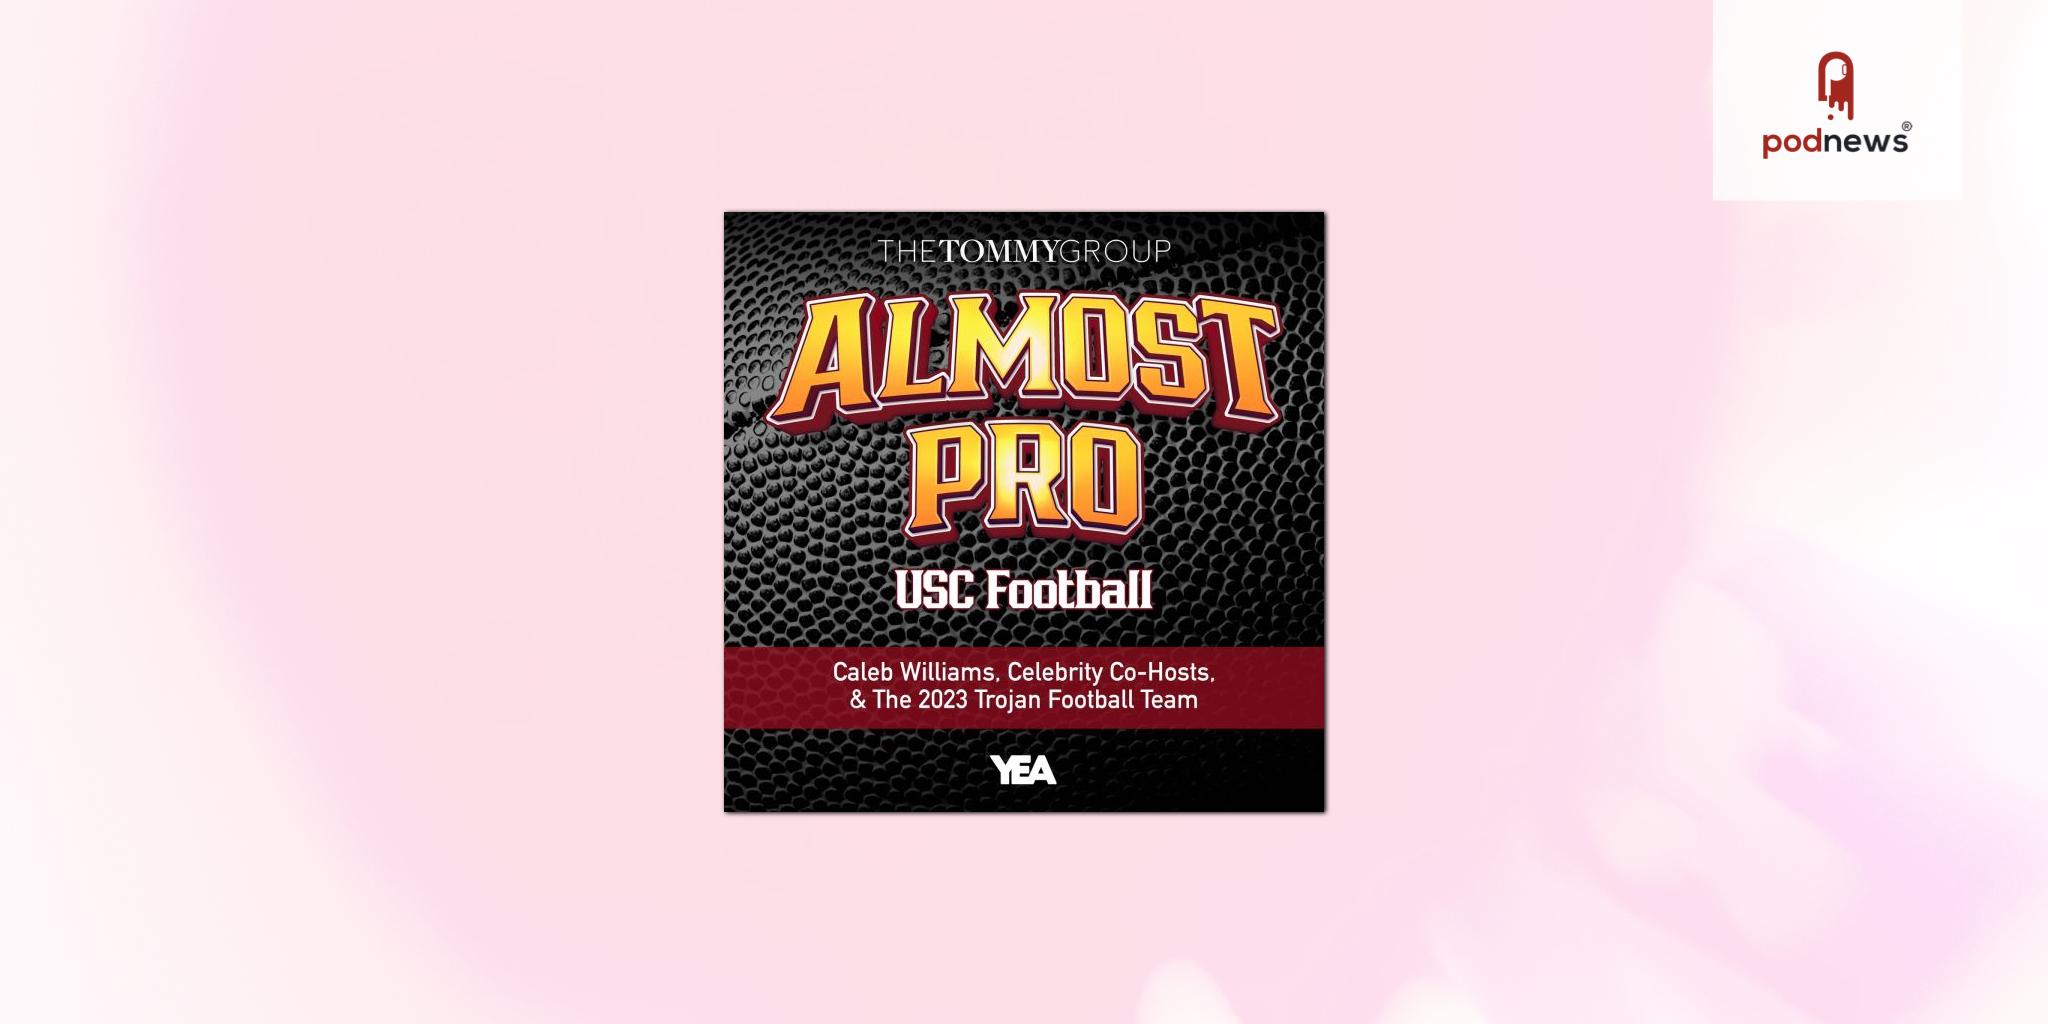 The Tommy Group and YEA Networks debut Almost Pro: USC Football